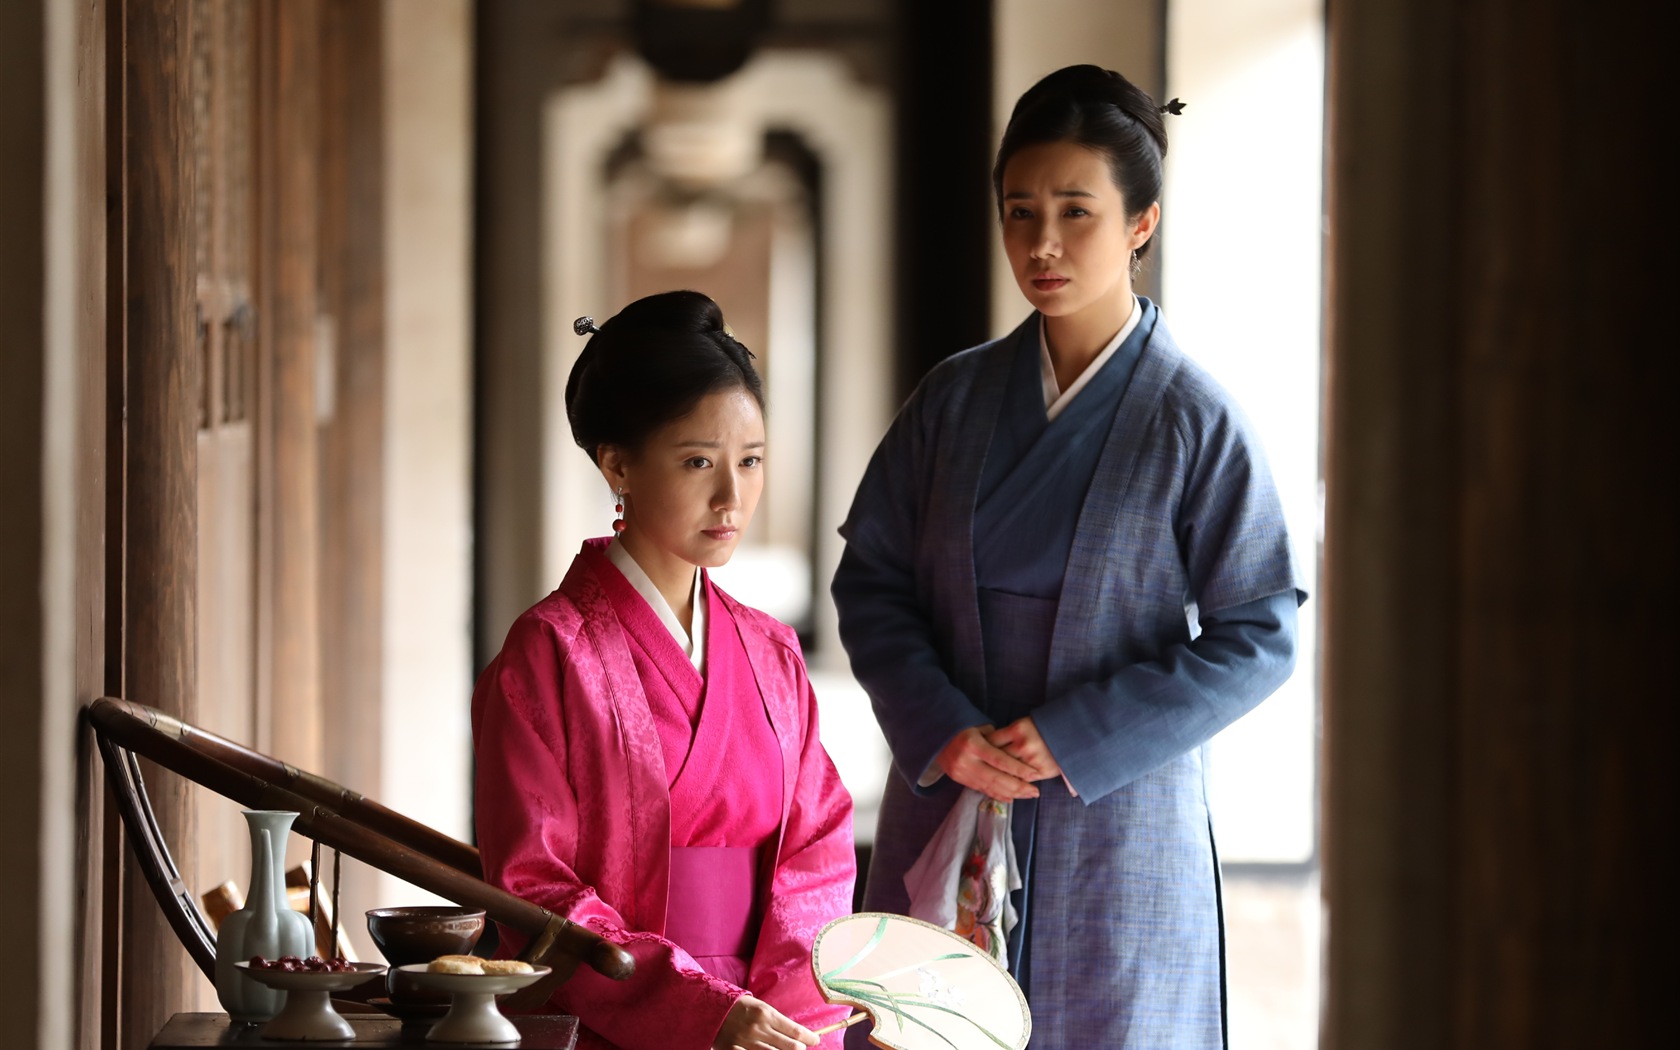 The Story Of MingLan, TV series HD wallpapers #8 - 1680x1050